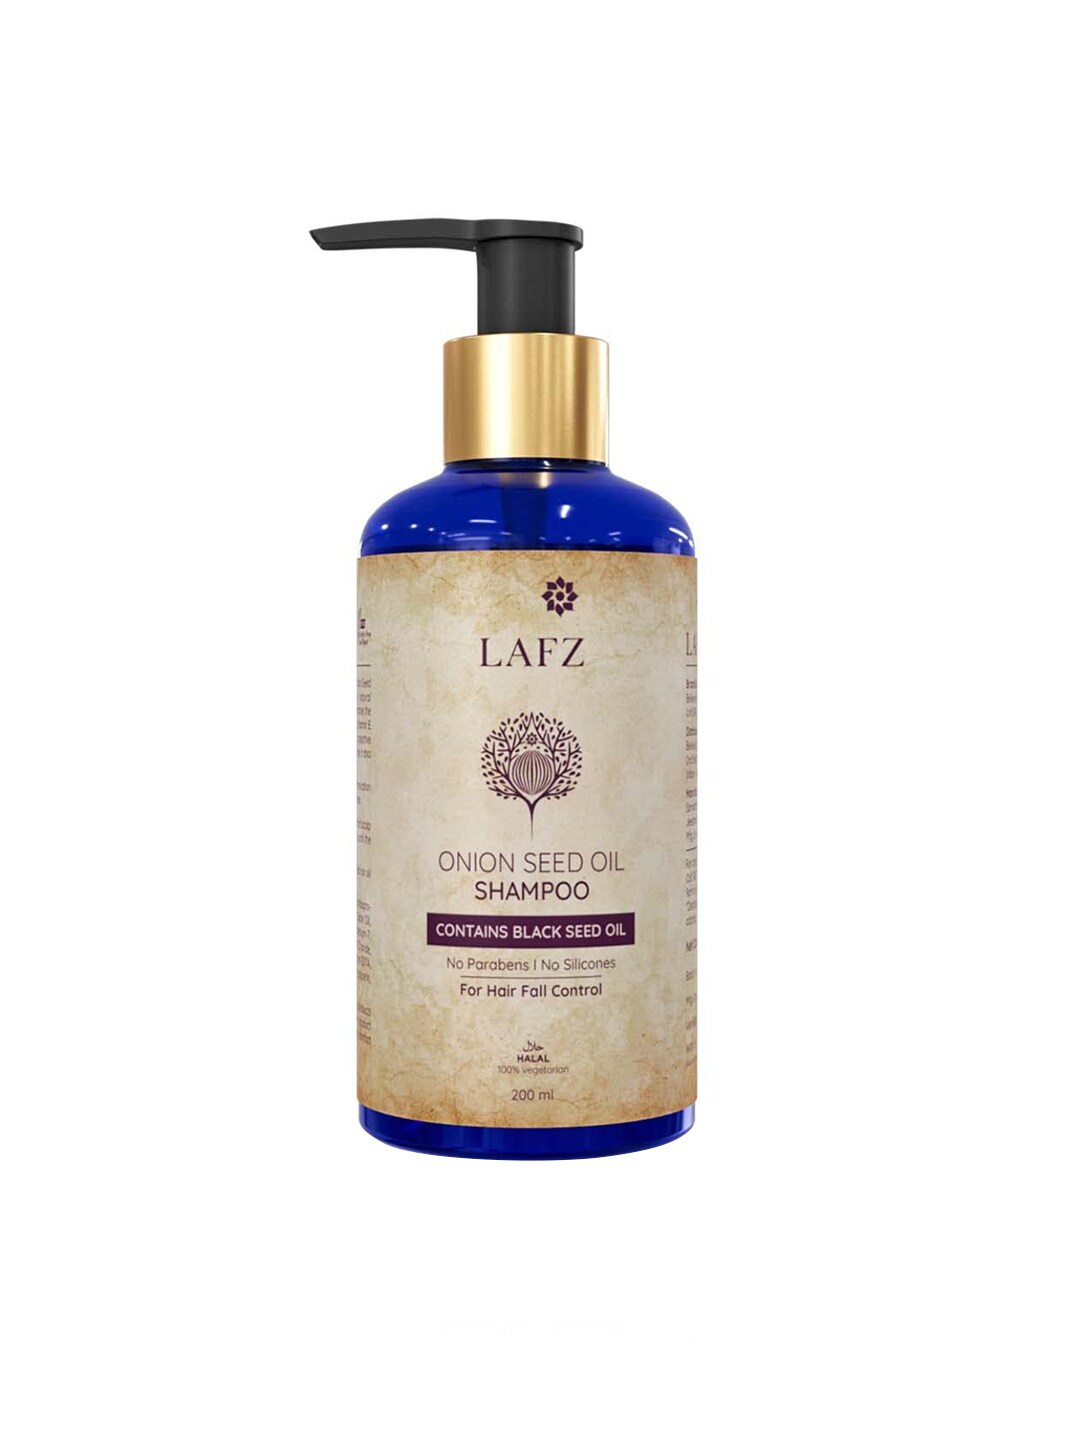 LAFZ Onion Seed Oil Shampoo with Black Seed Oil - 200 ml Price in India